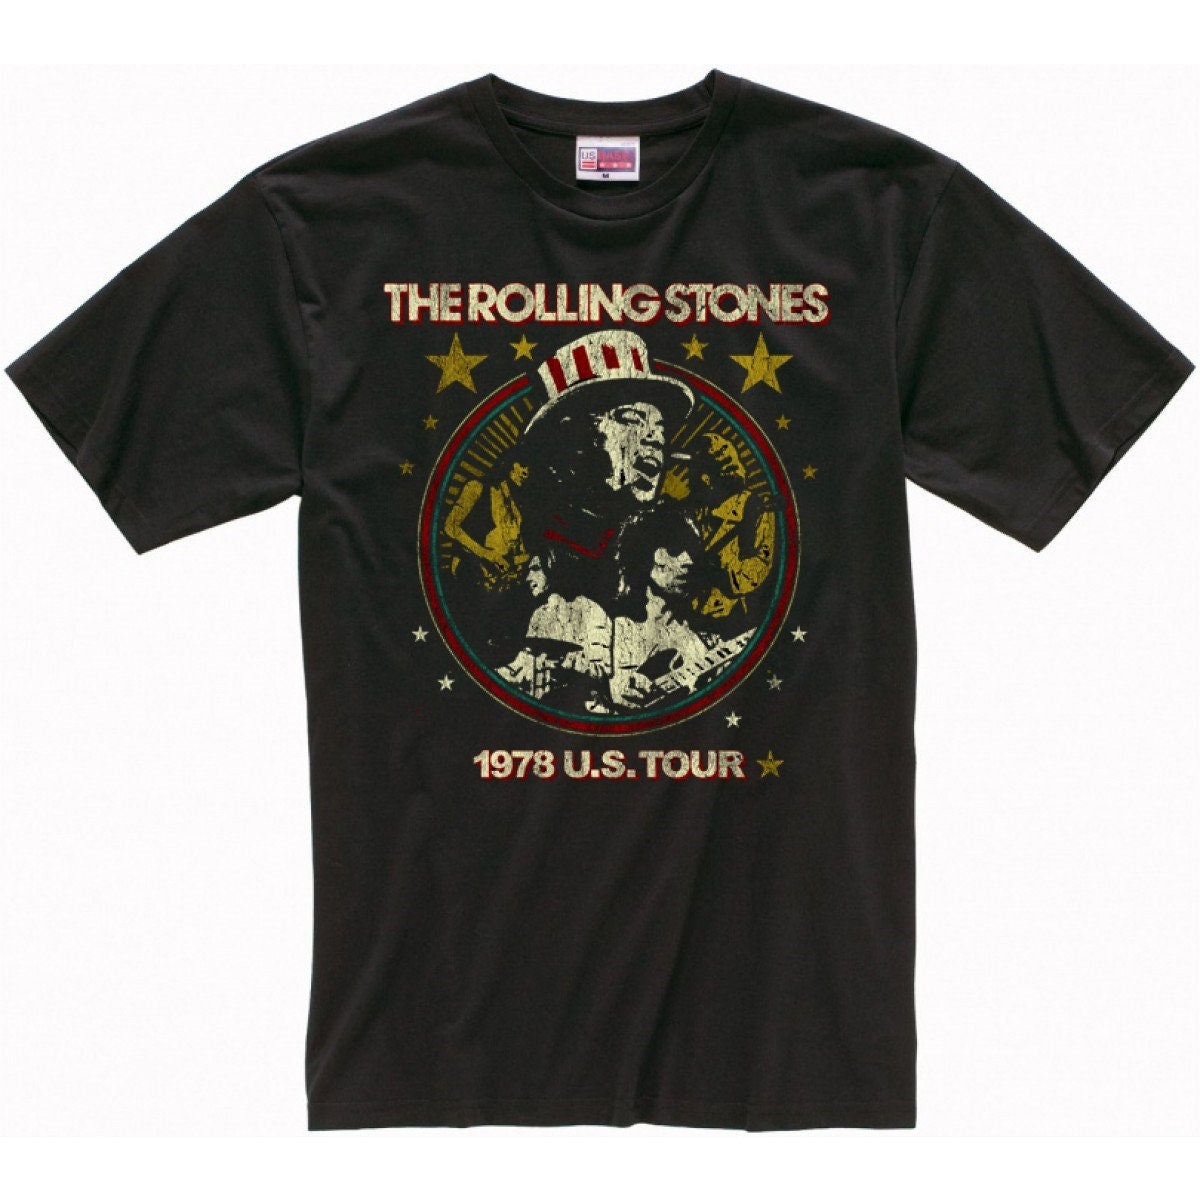 Discover The Rolling Stones 1978 US Tour T-Shirt,